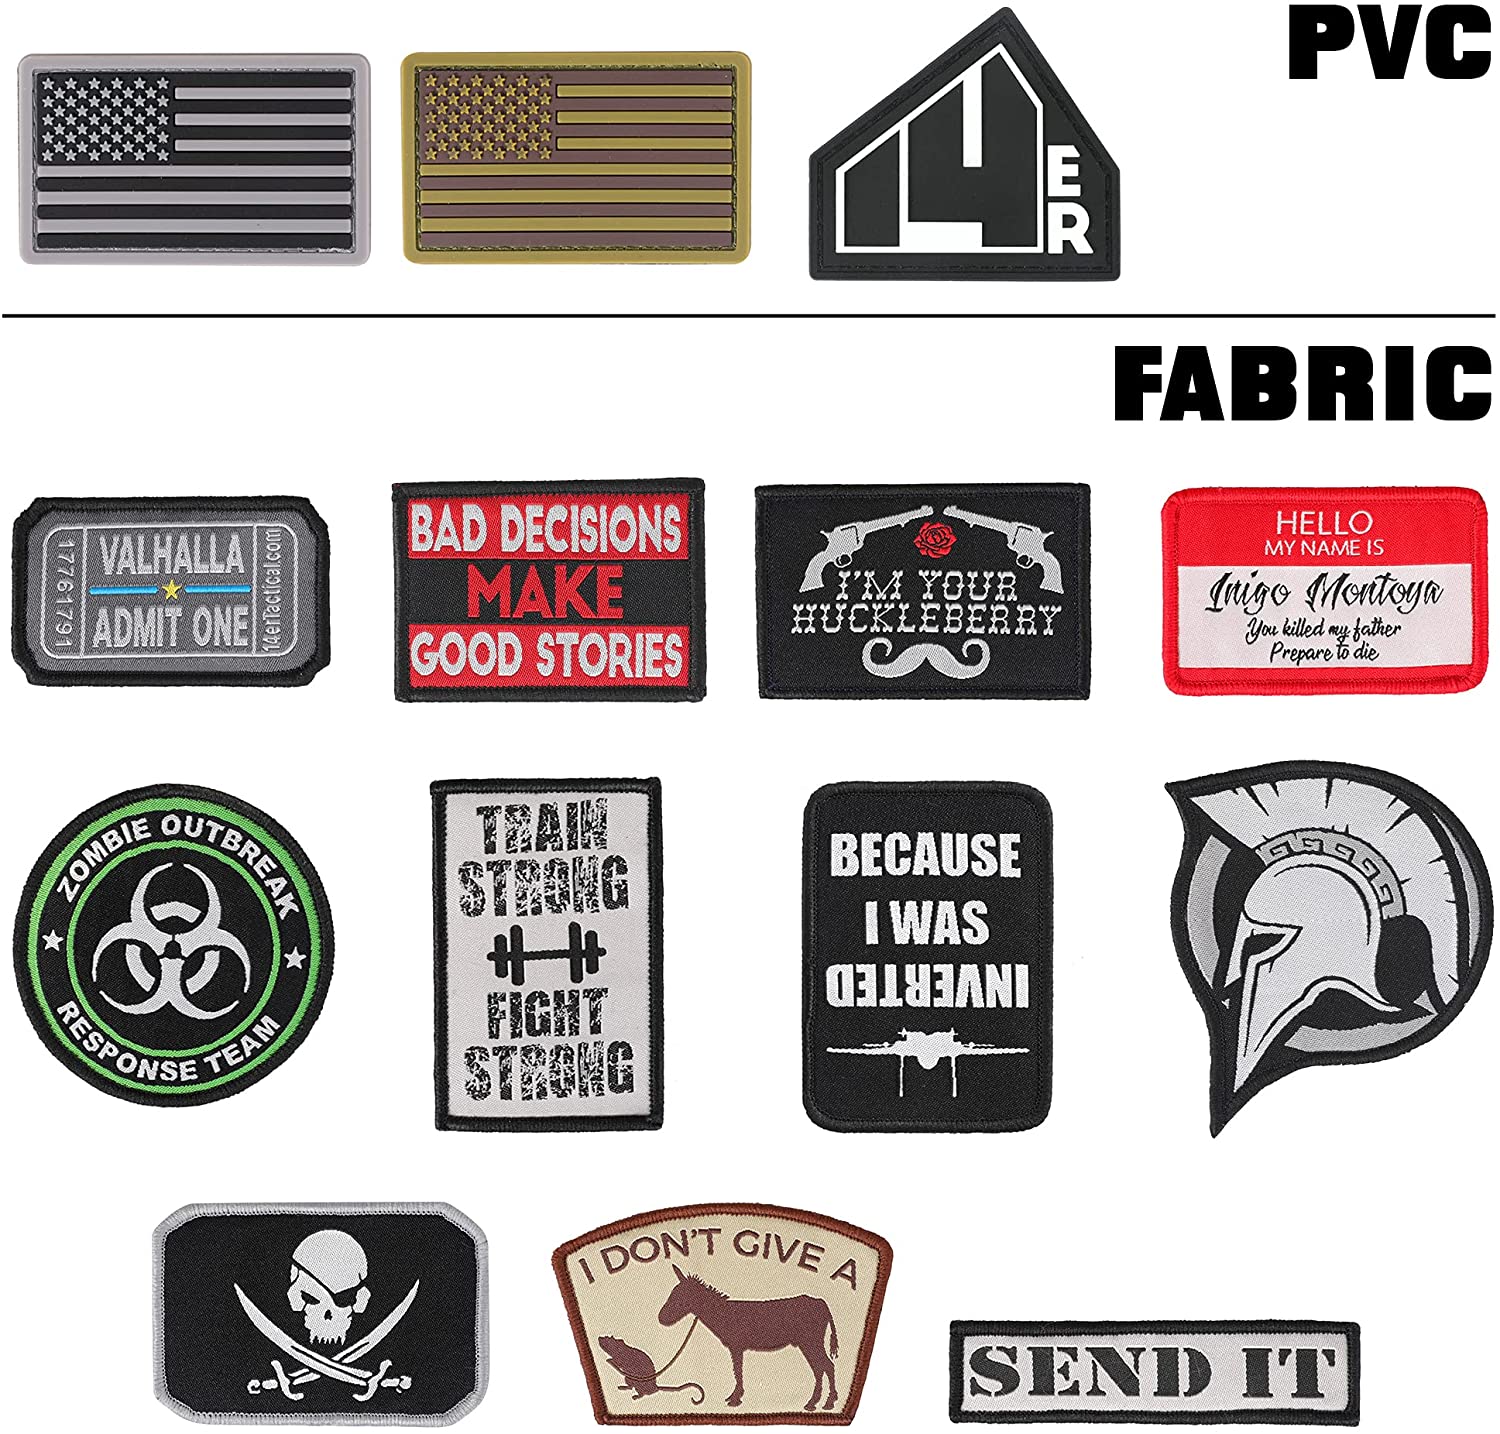 Dearhouse 14er Tactical Morale Patches (14-Pack)